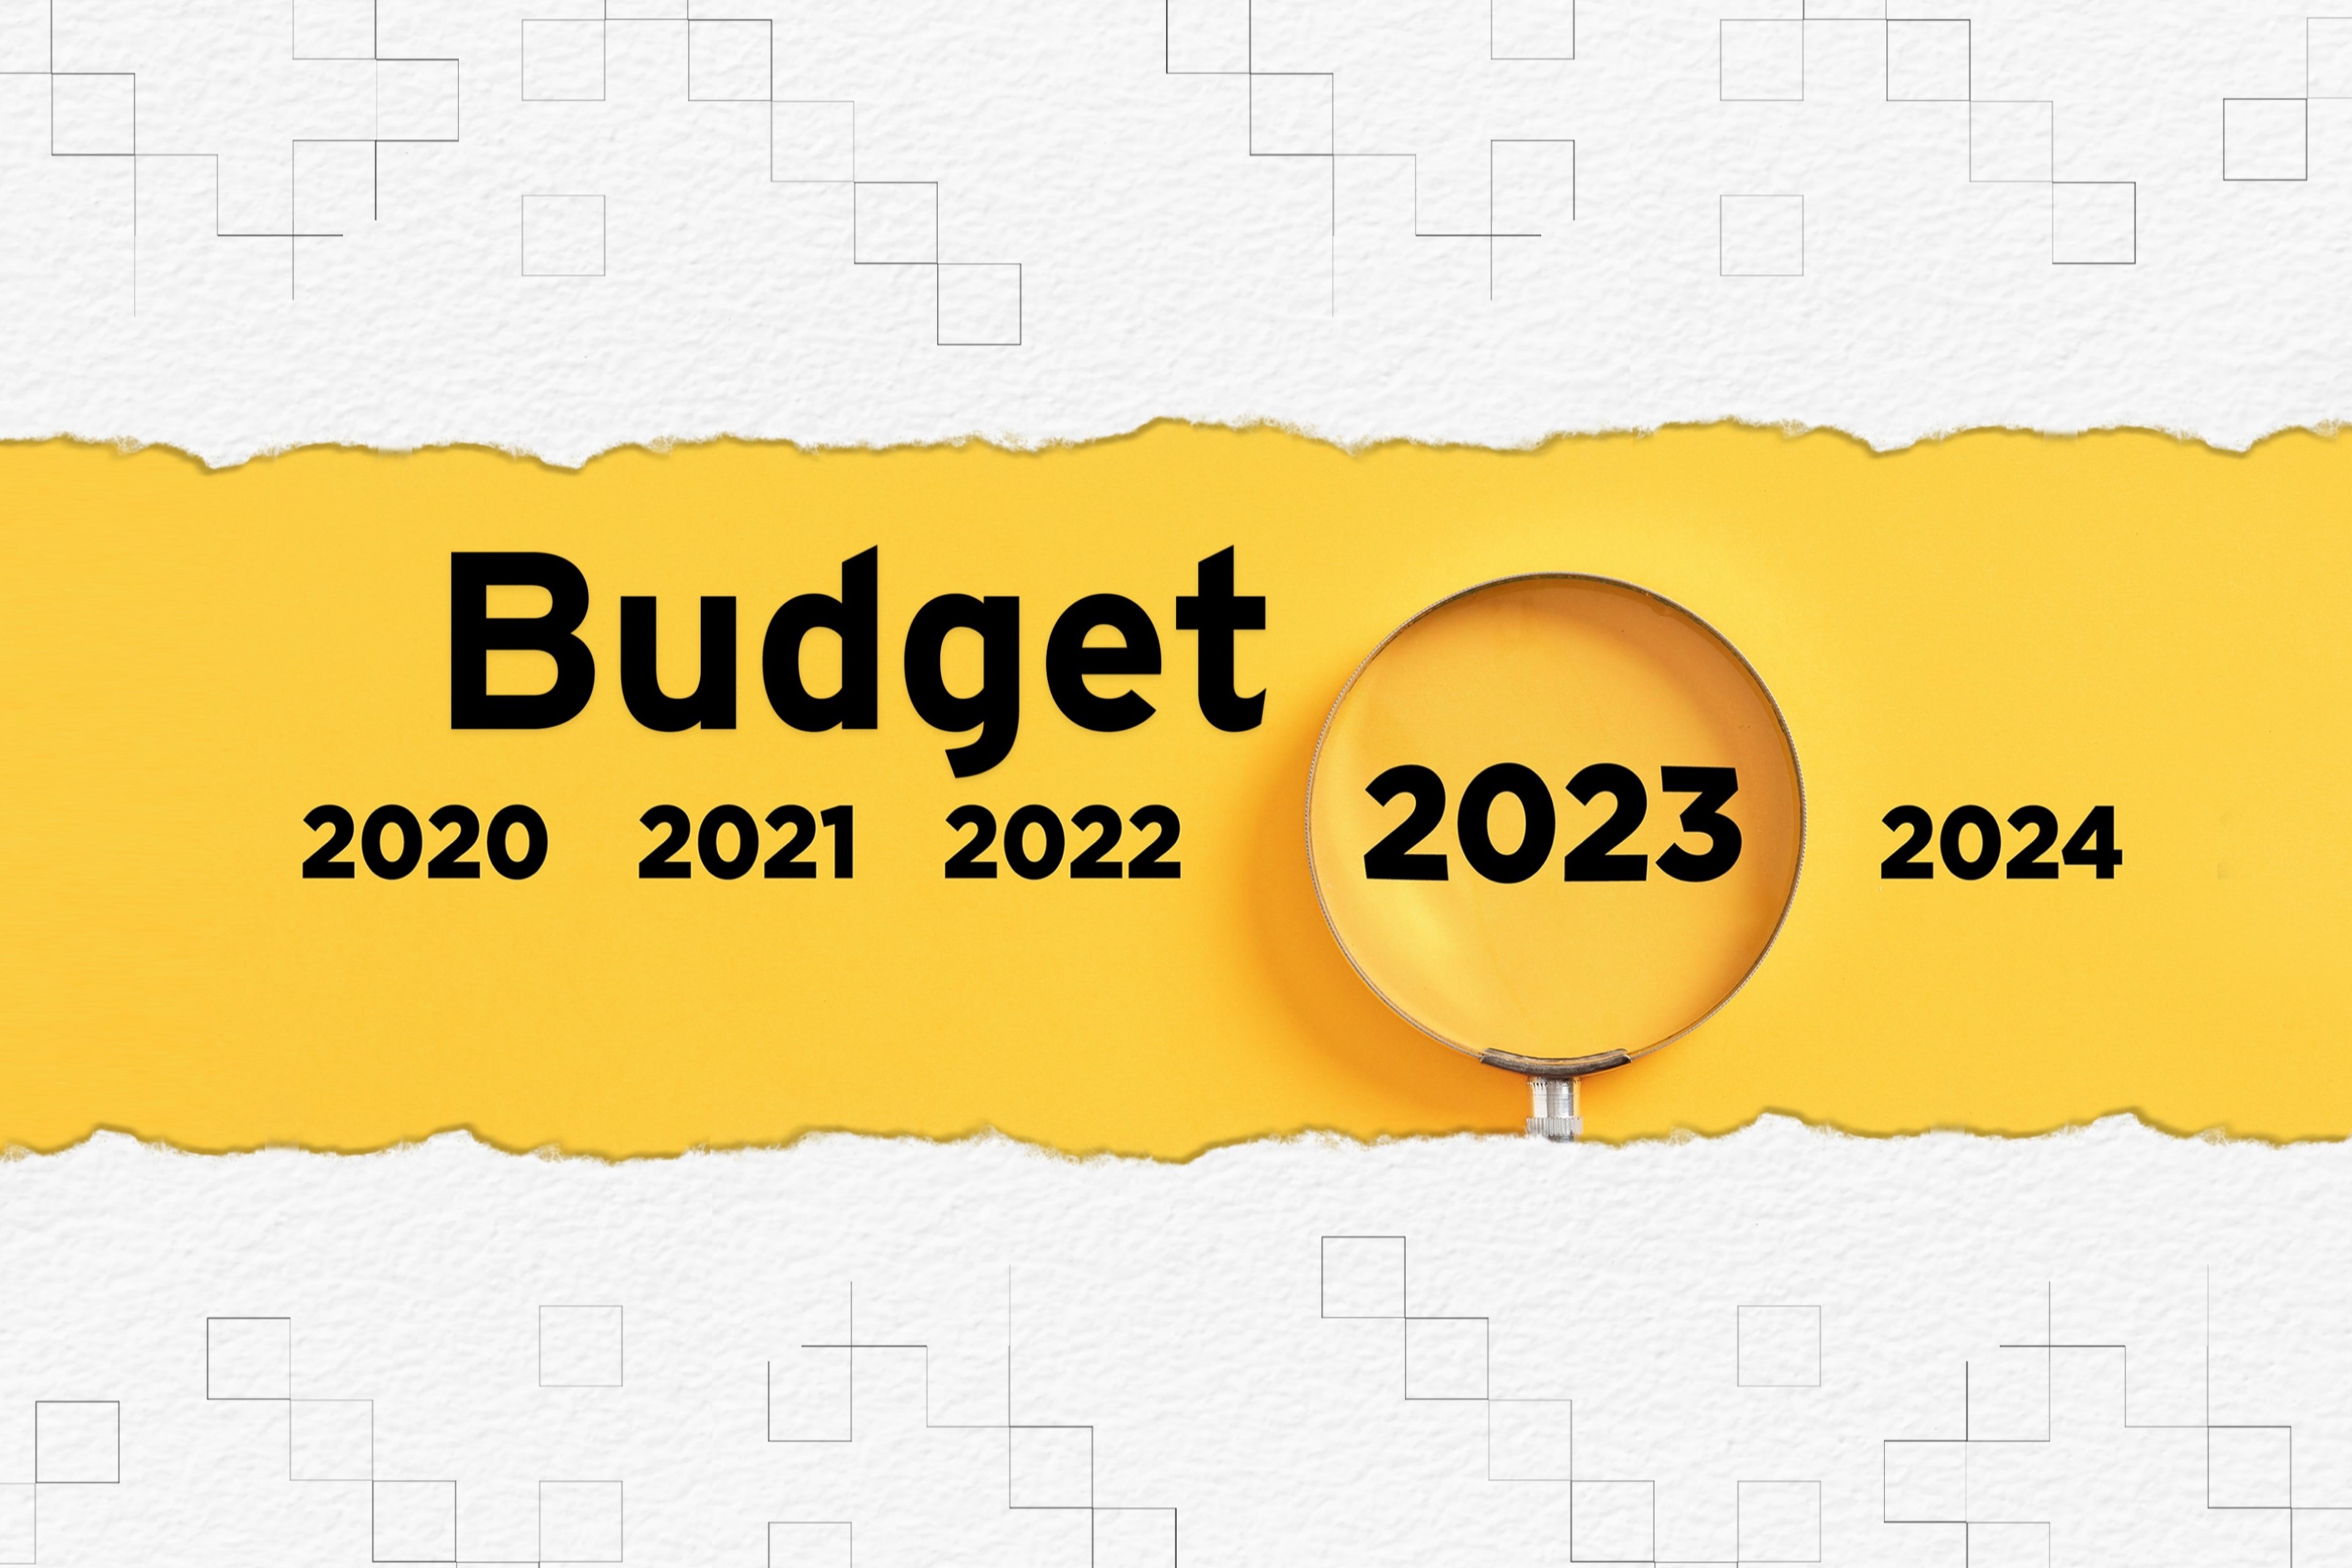 Reaction From Industry Stalwarts On Union Budget 2023-2024